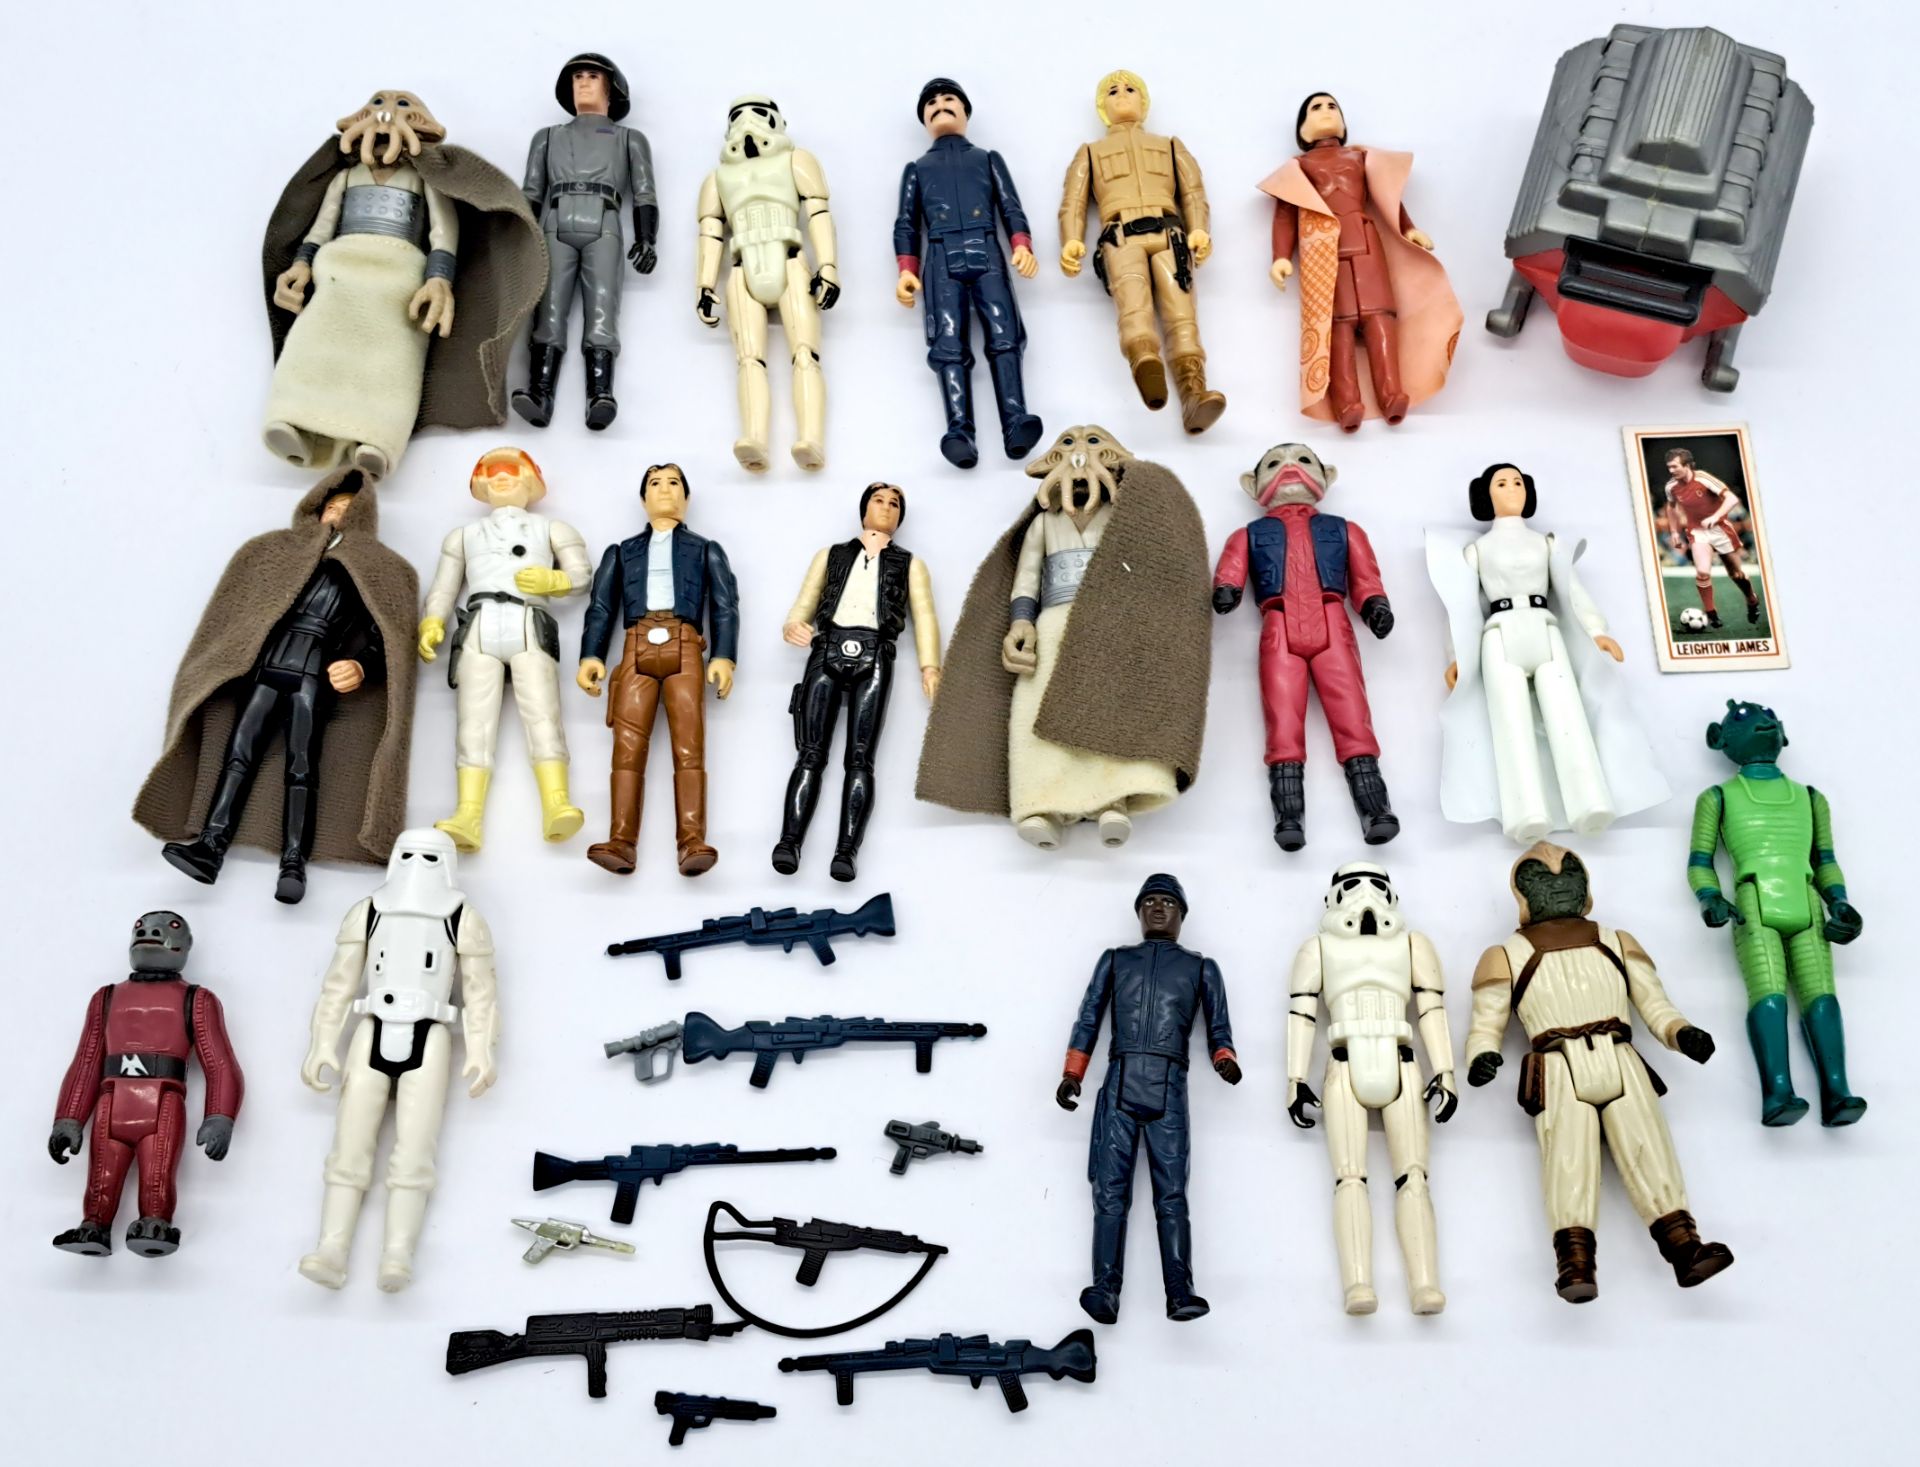 Kenner Star Wars vintage incomplete figures lot and random accessories. Fair to good.